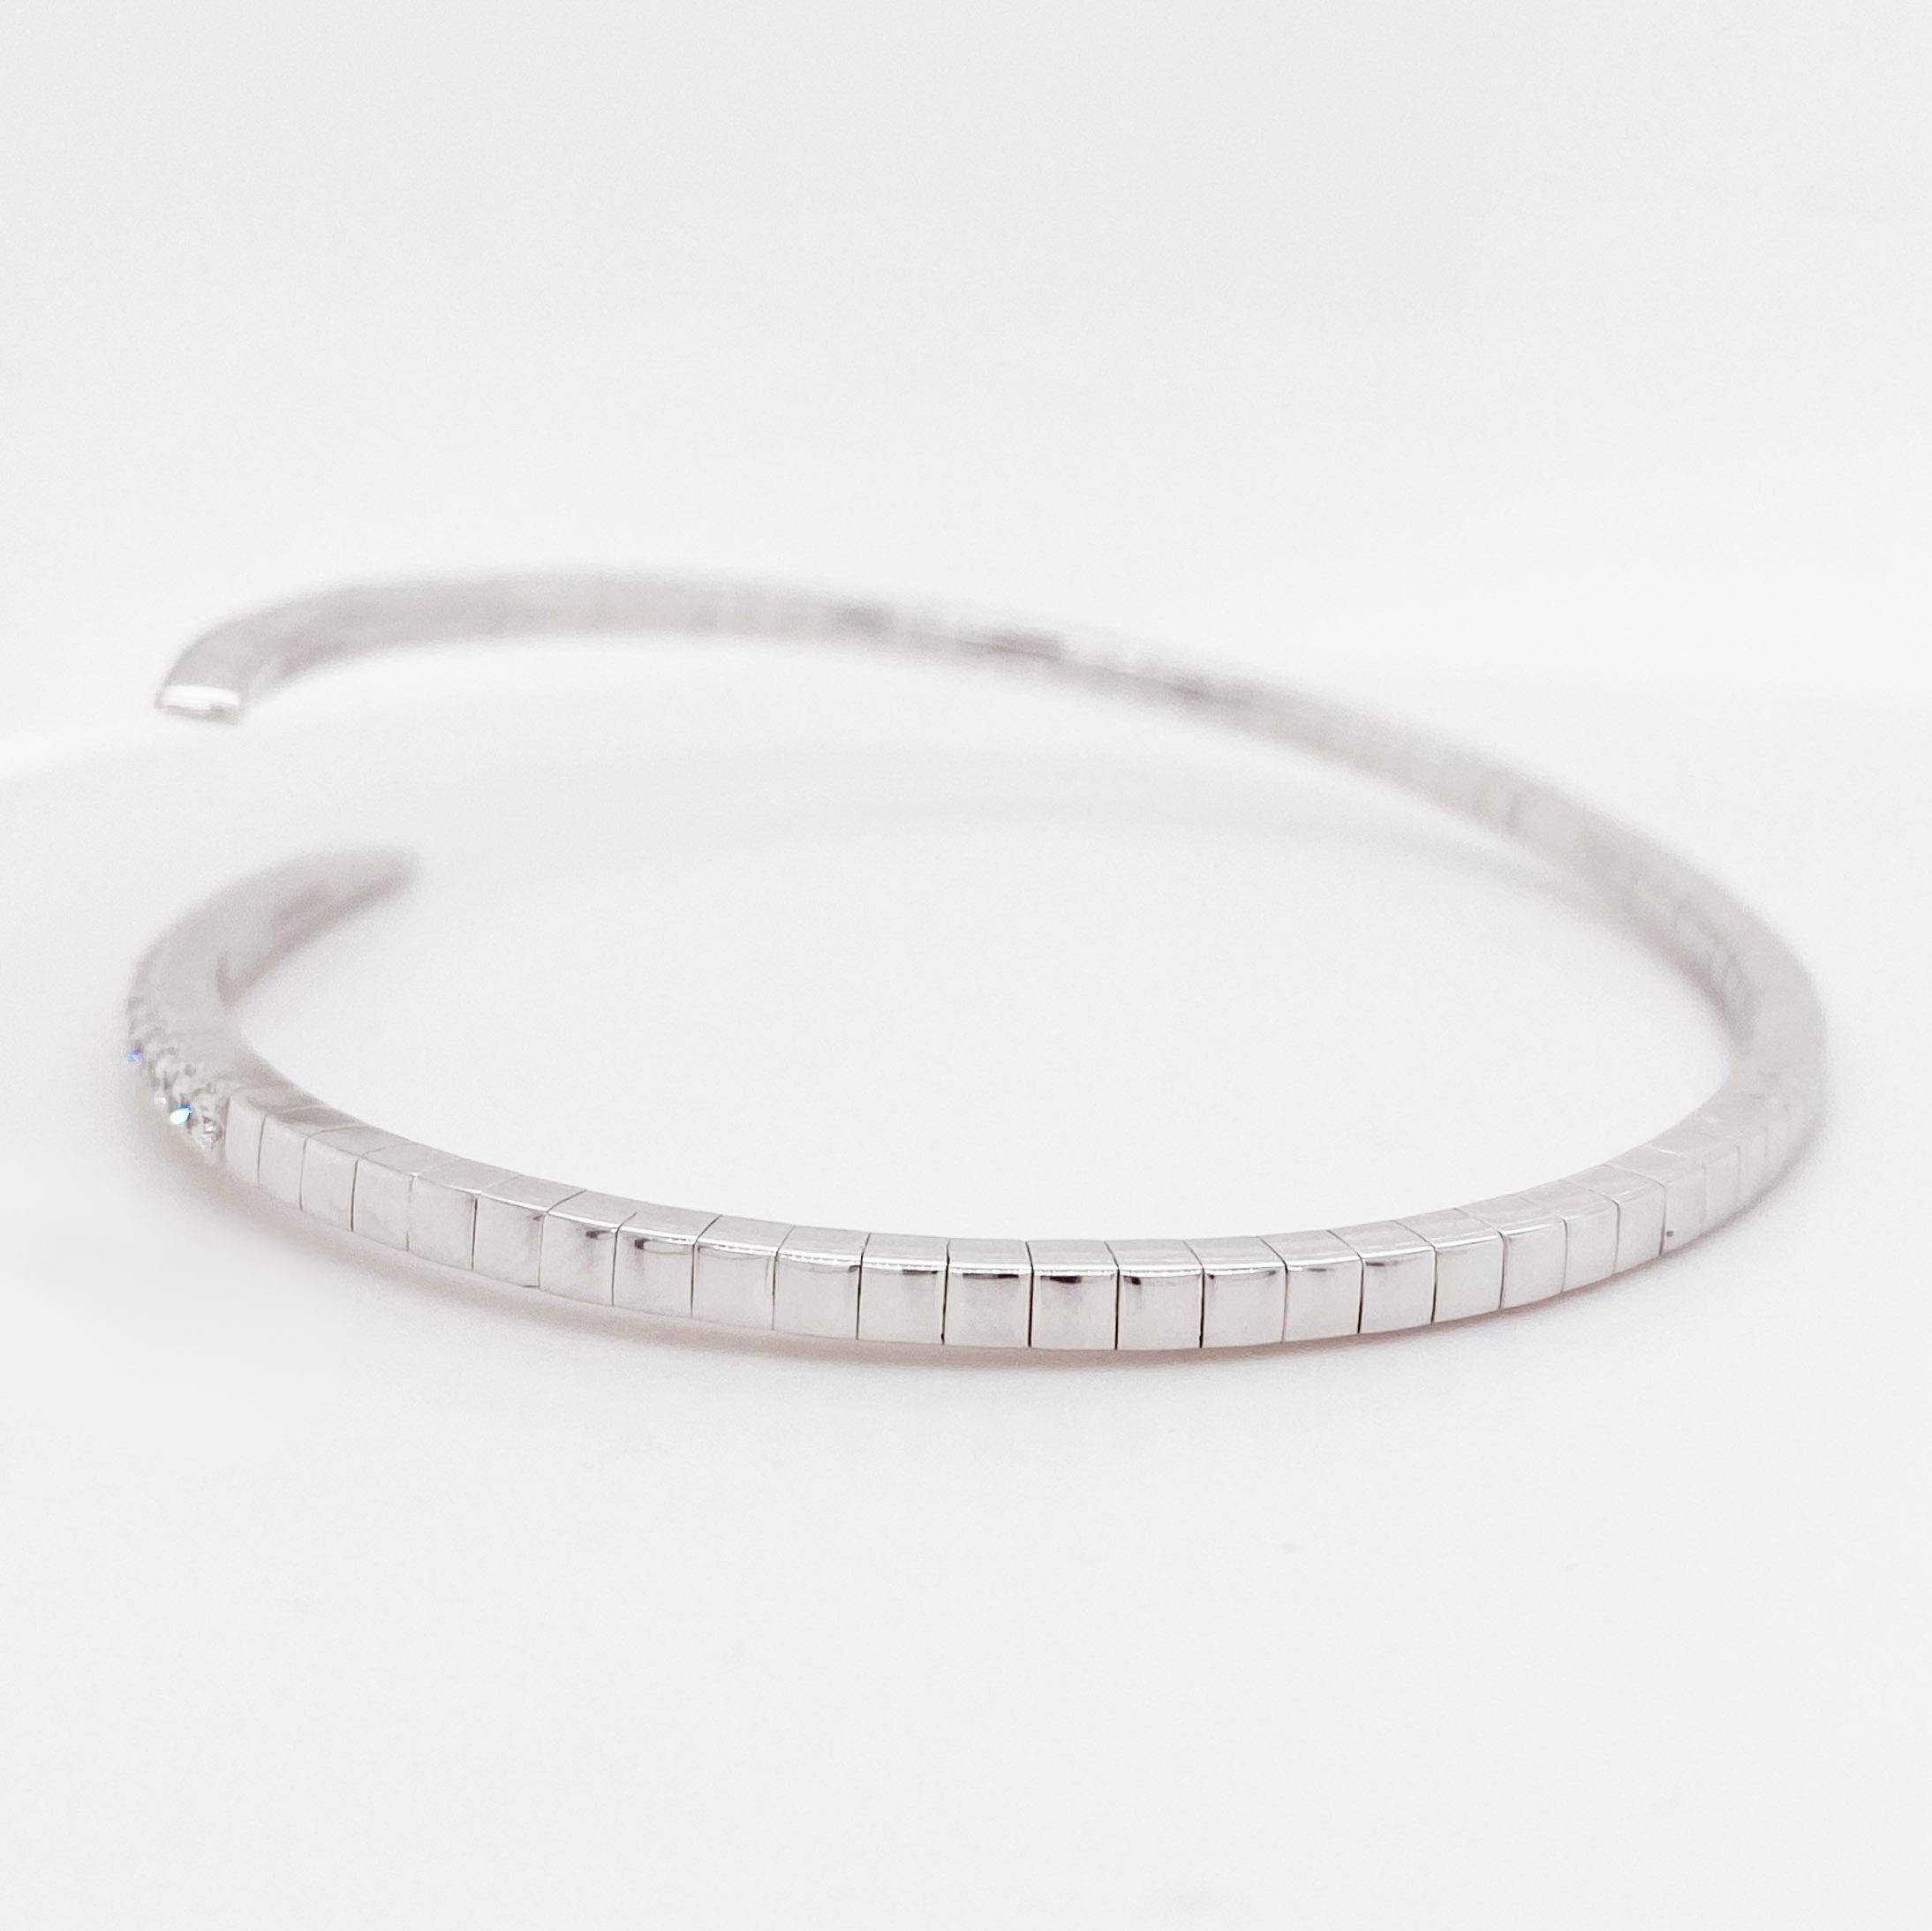 Gorgeous, bypass diamond bangle! The 14k white gold diamond bracelet is a flexible bypass design with .91 carats total diamond weight. The diamond bracelet has an edgy, spiked design that is stunning on its own and can easily be paired with other